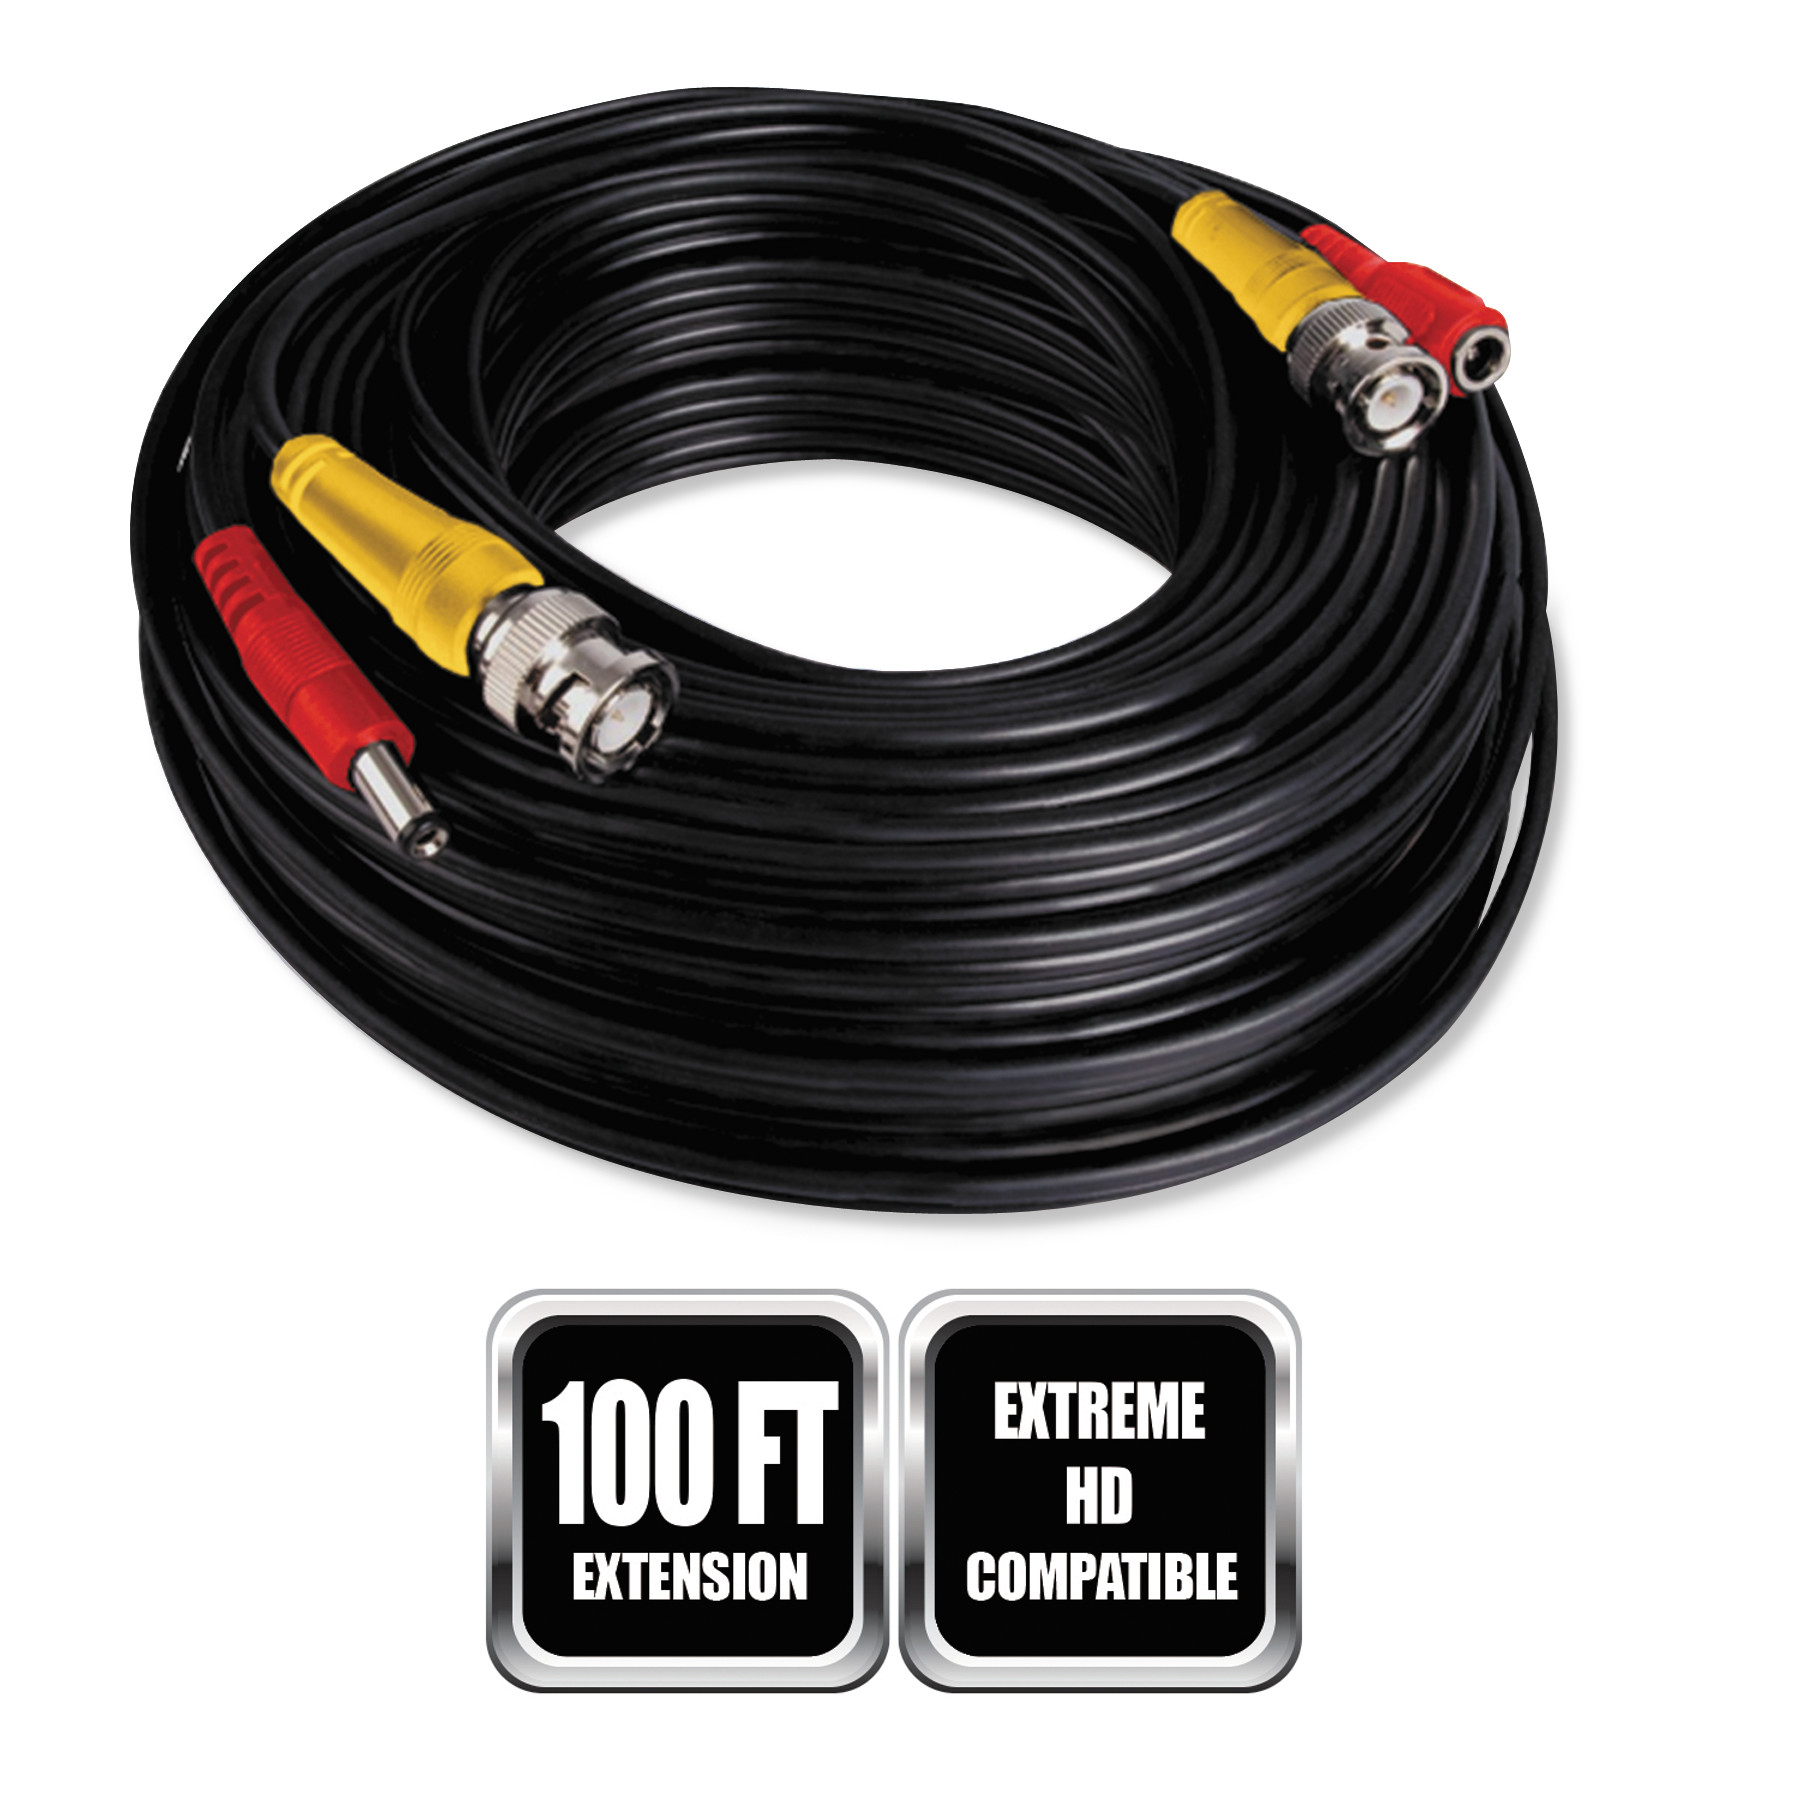 BNC Video/Power/Audio Camera Extension Cable, 100 ft